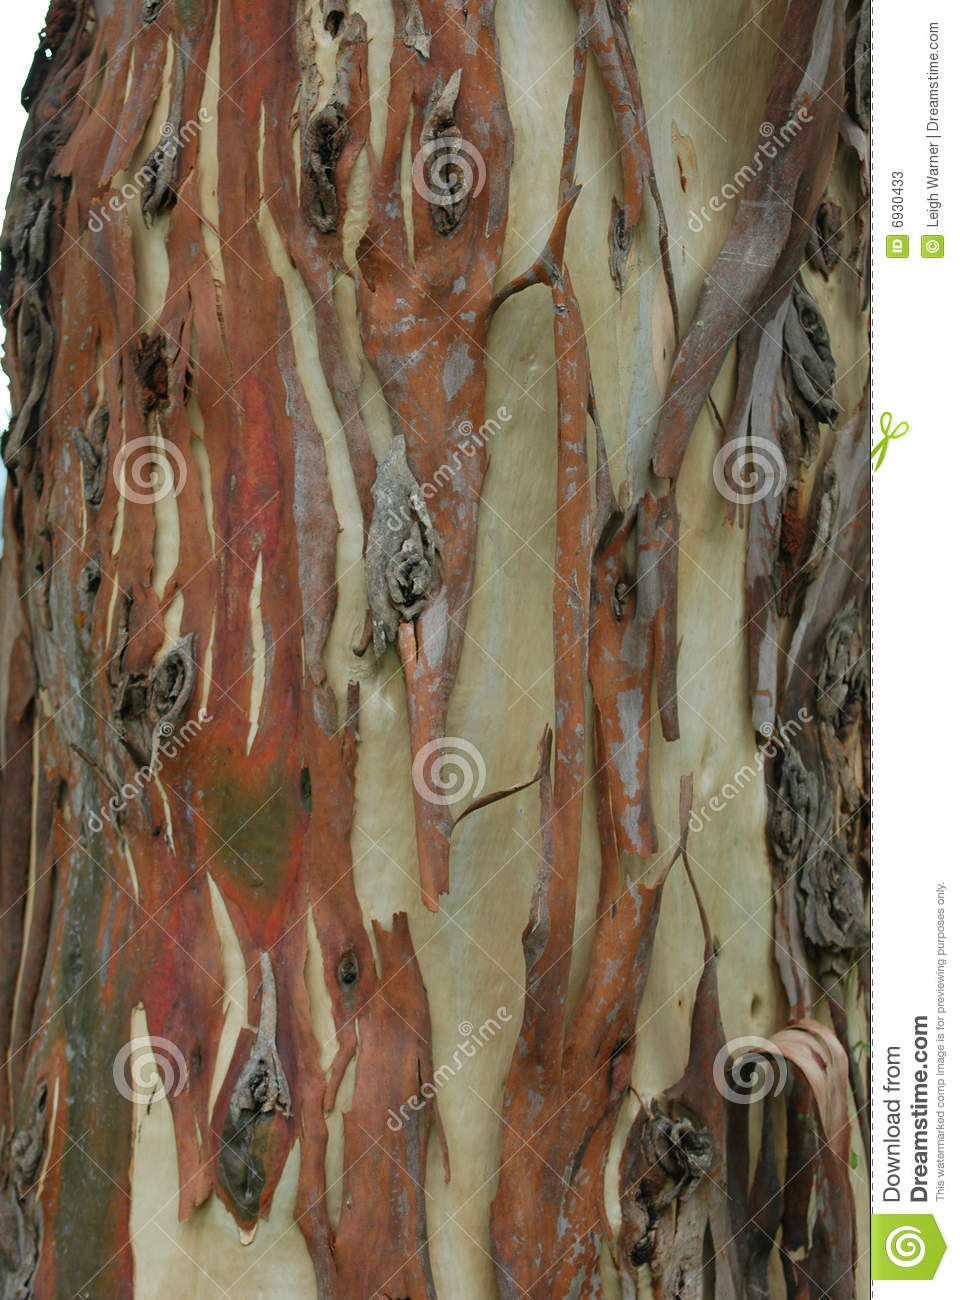 Image Taken Of Some Bark Peeling Of The Trunk Of A Gum Tree